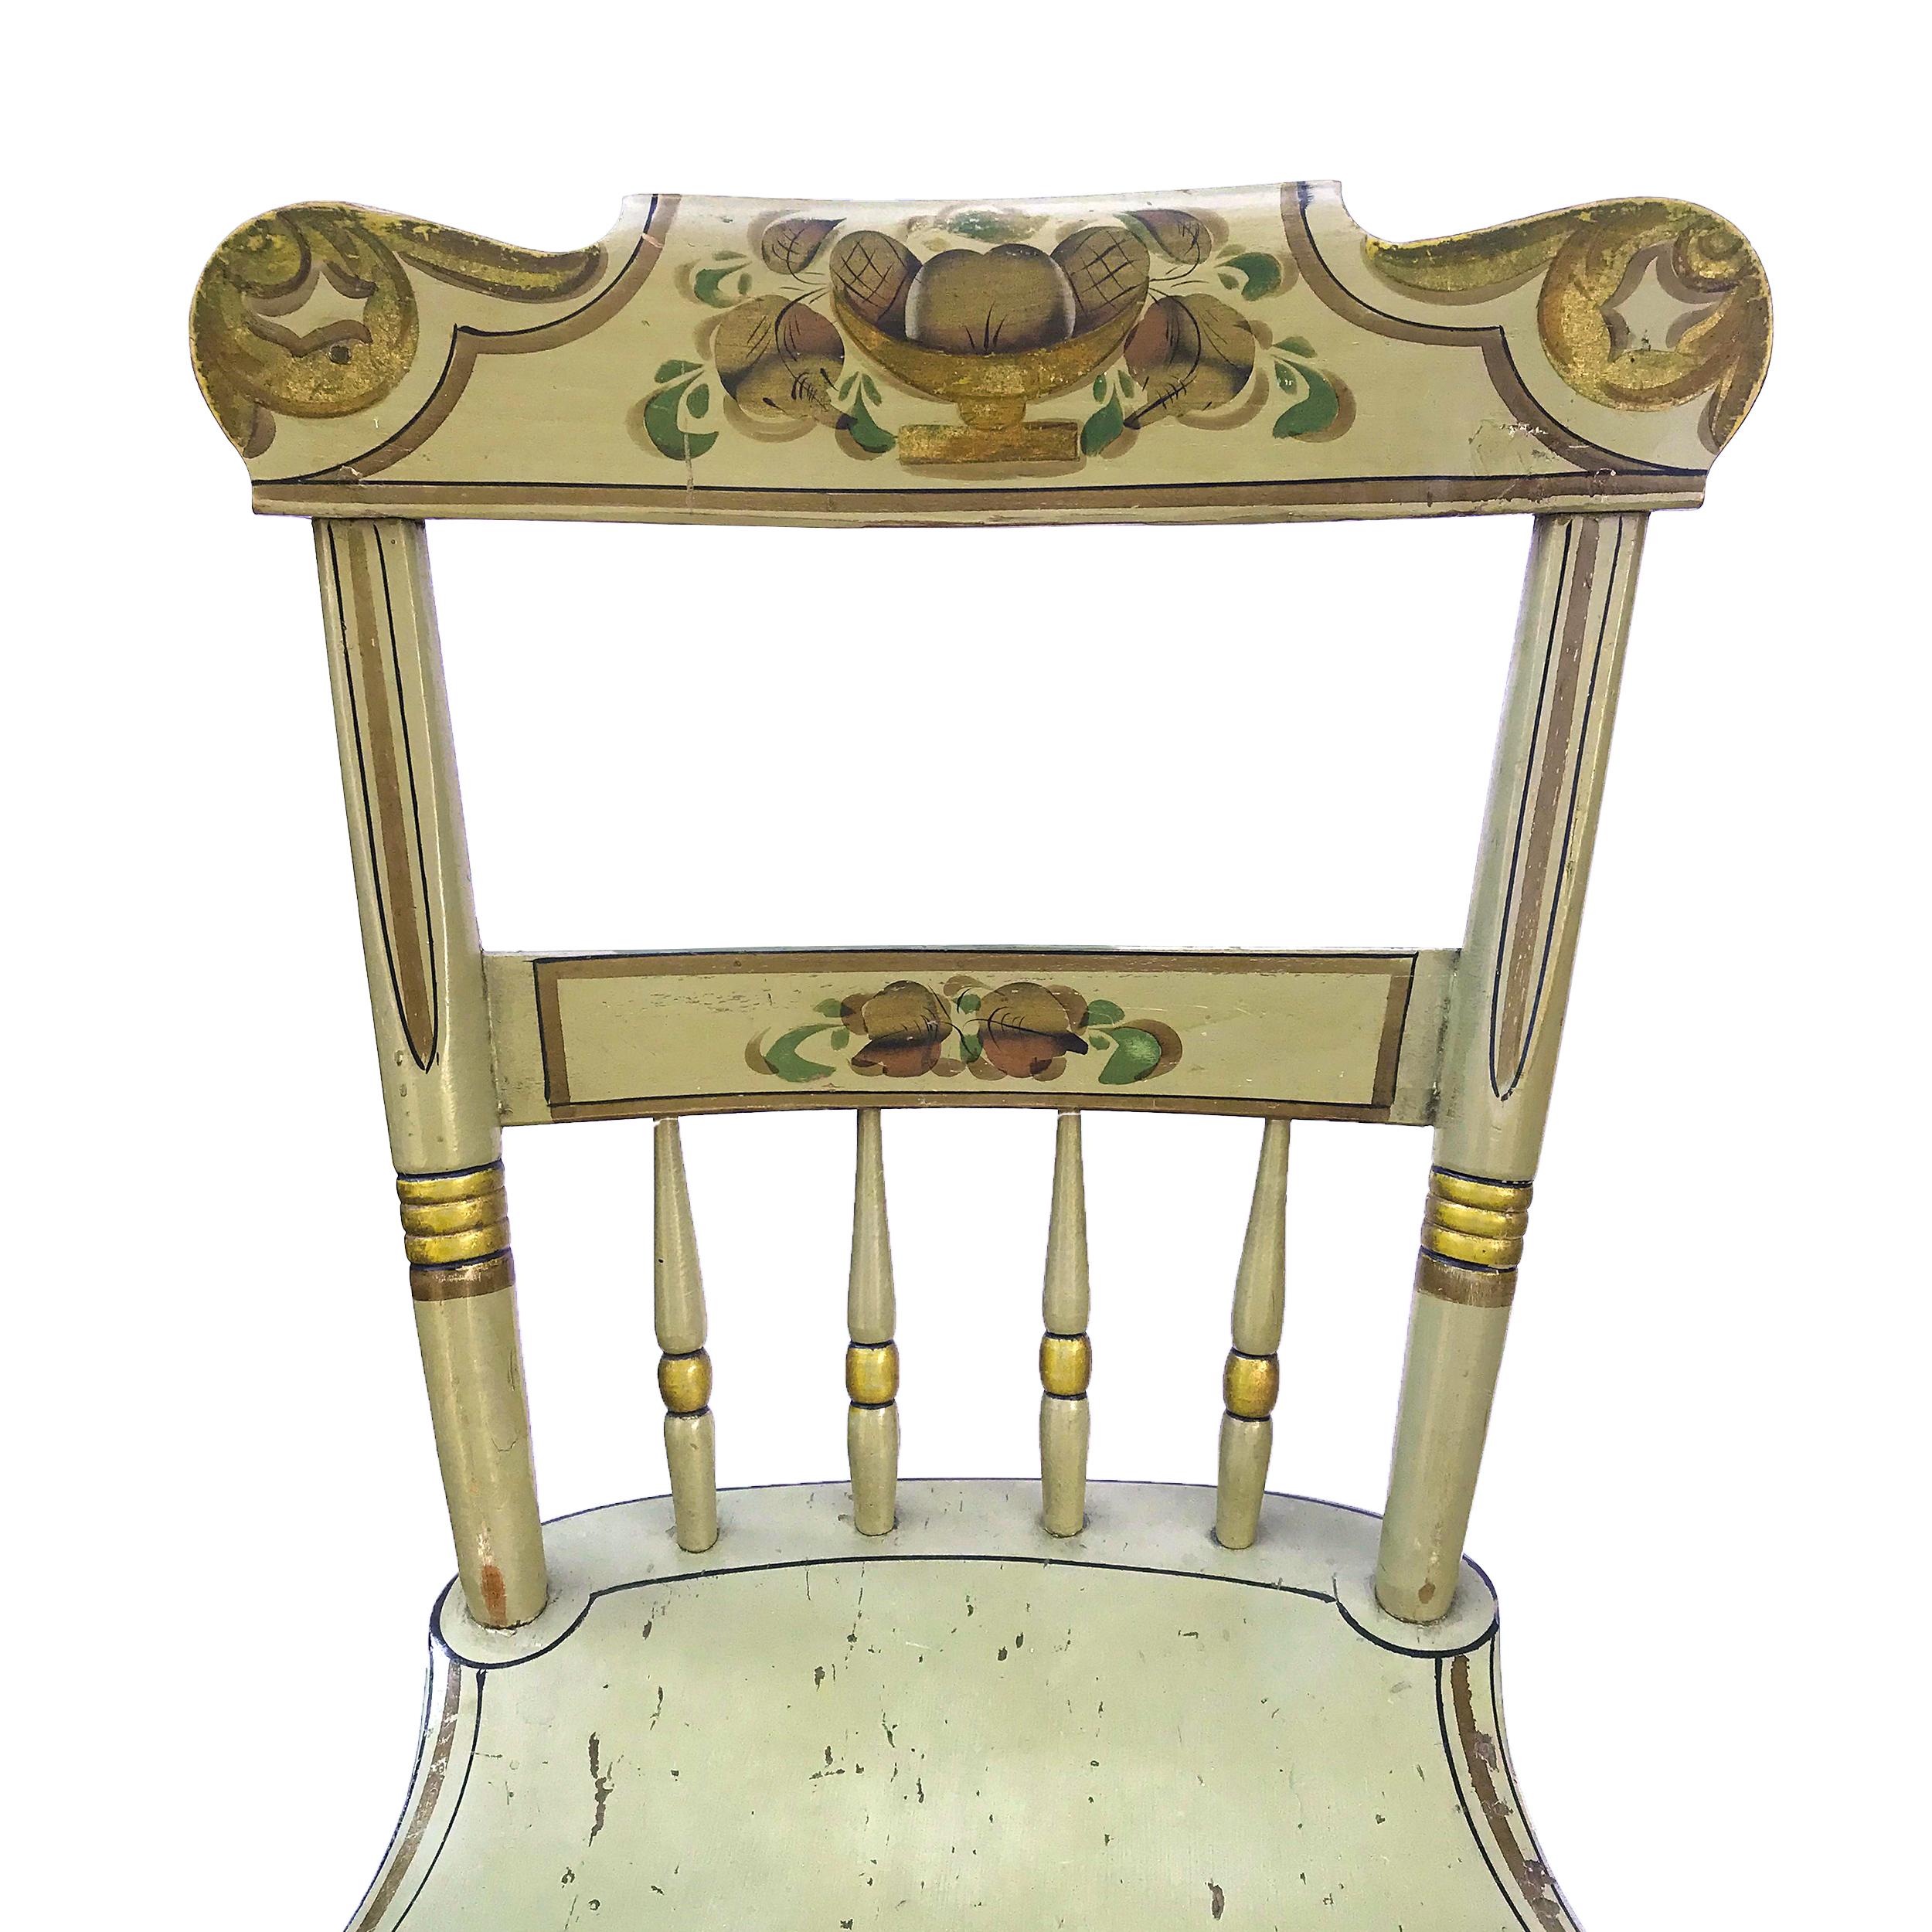 North American Set of Six Paint Decorated Plank Seat Chairs, circa 1860